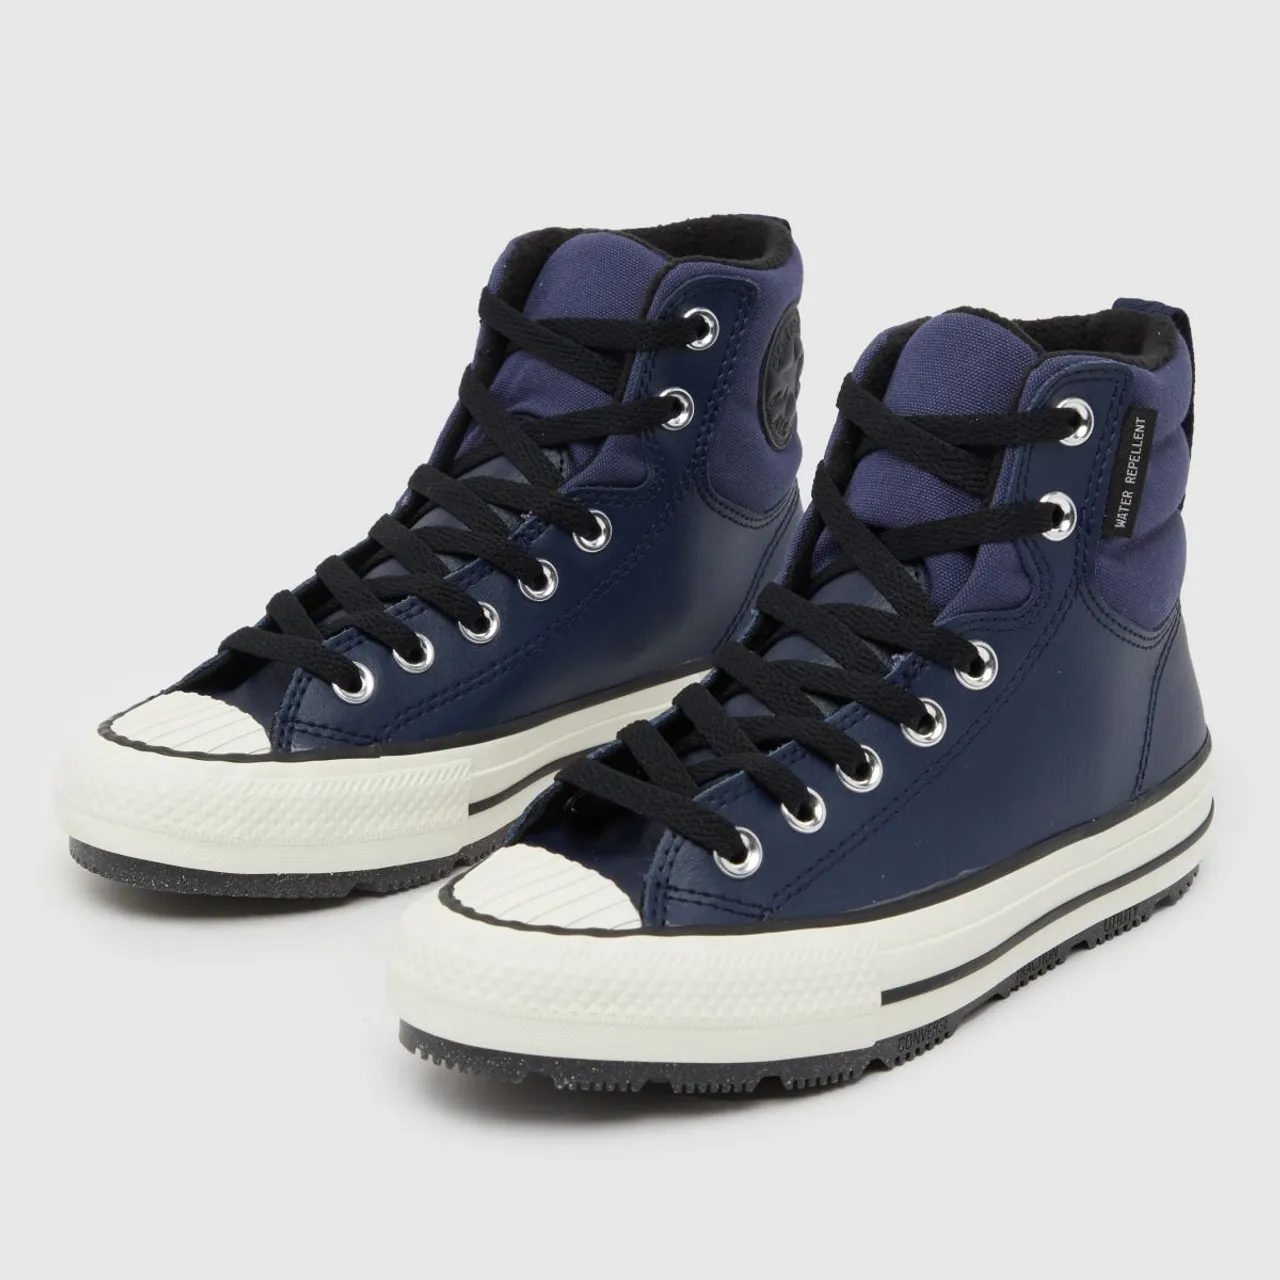 Converse Navy All Star Berkshire Boys Youth Trainers